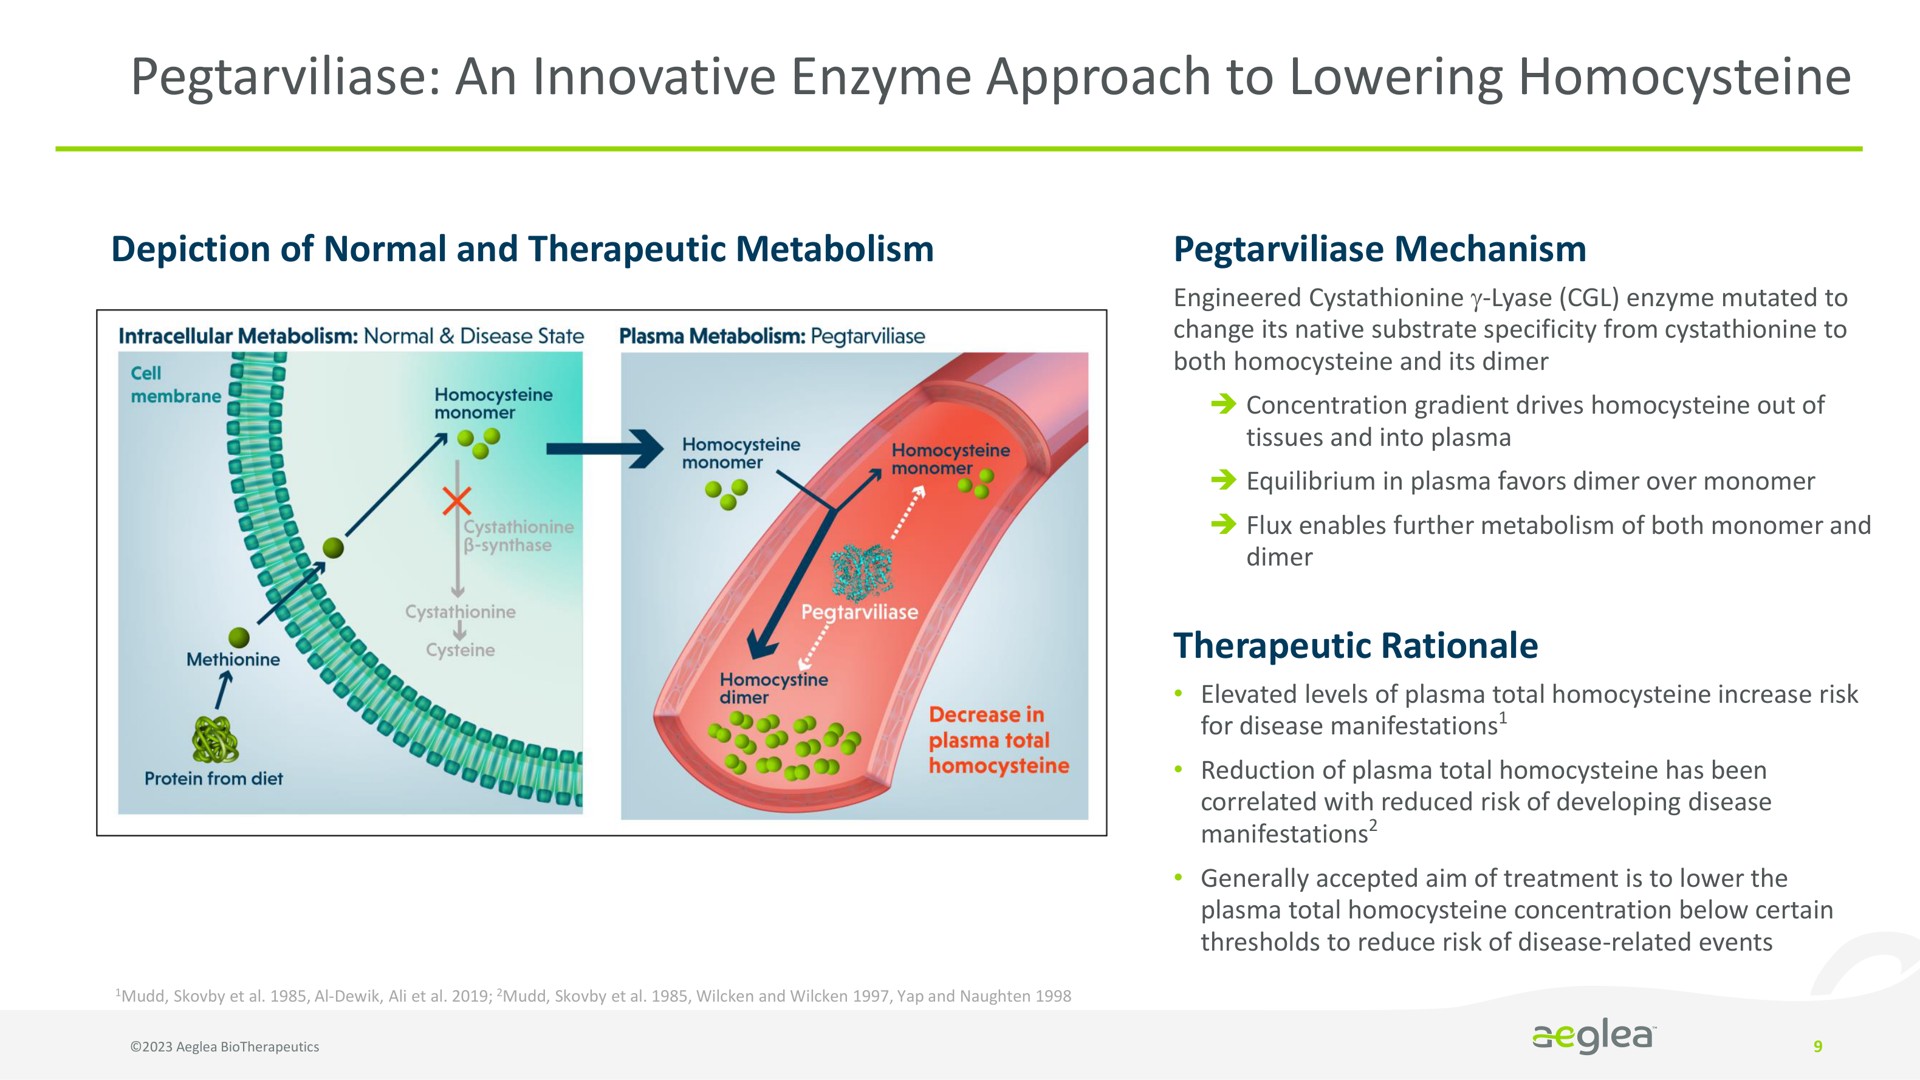 an innovative enzyme approach to lowering | Aeglea BioTherapeutics